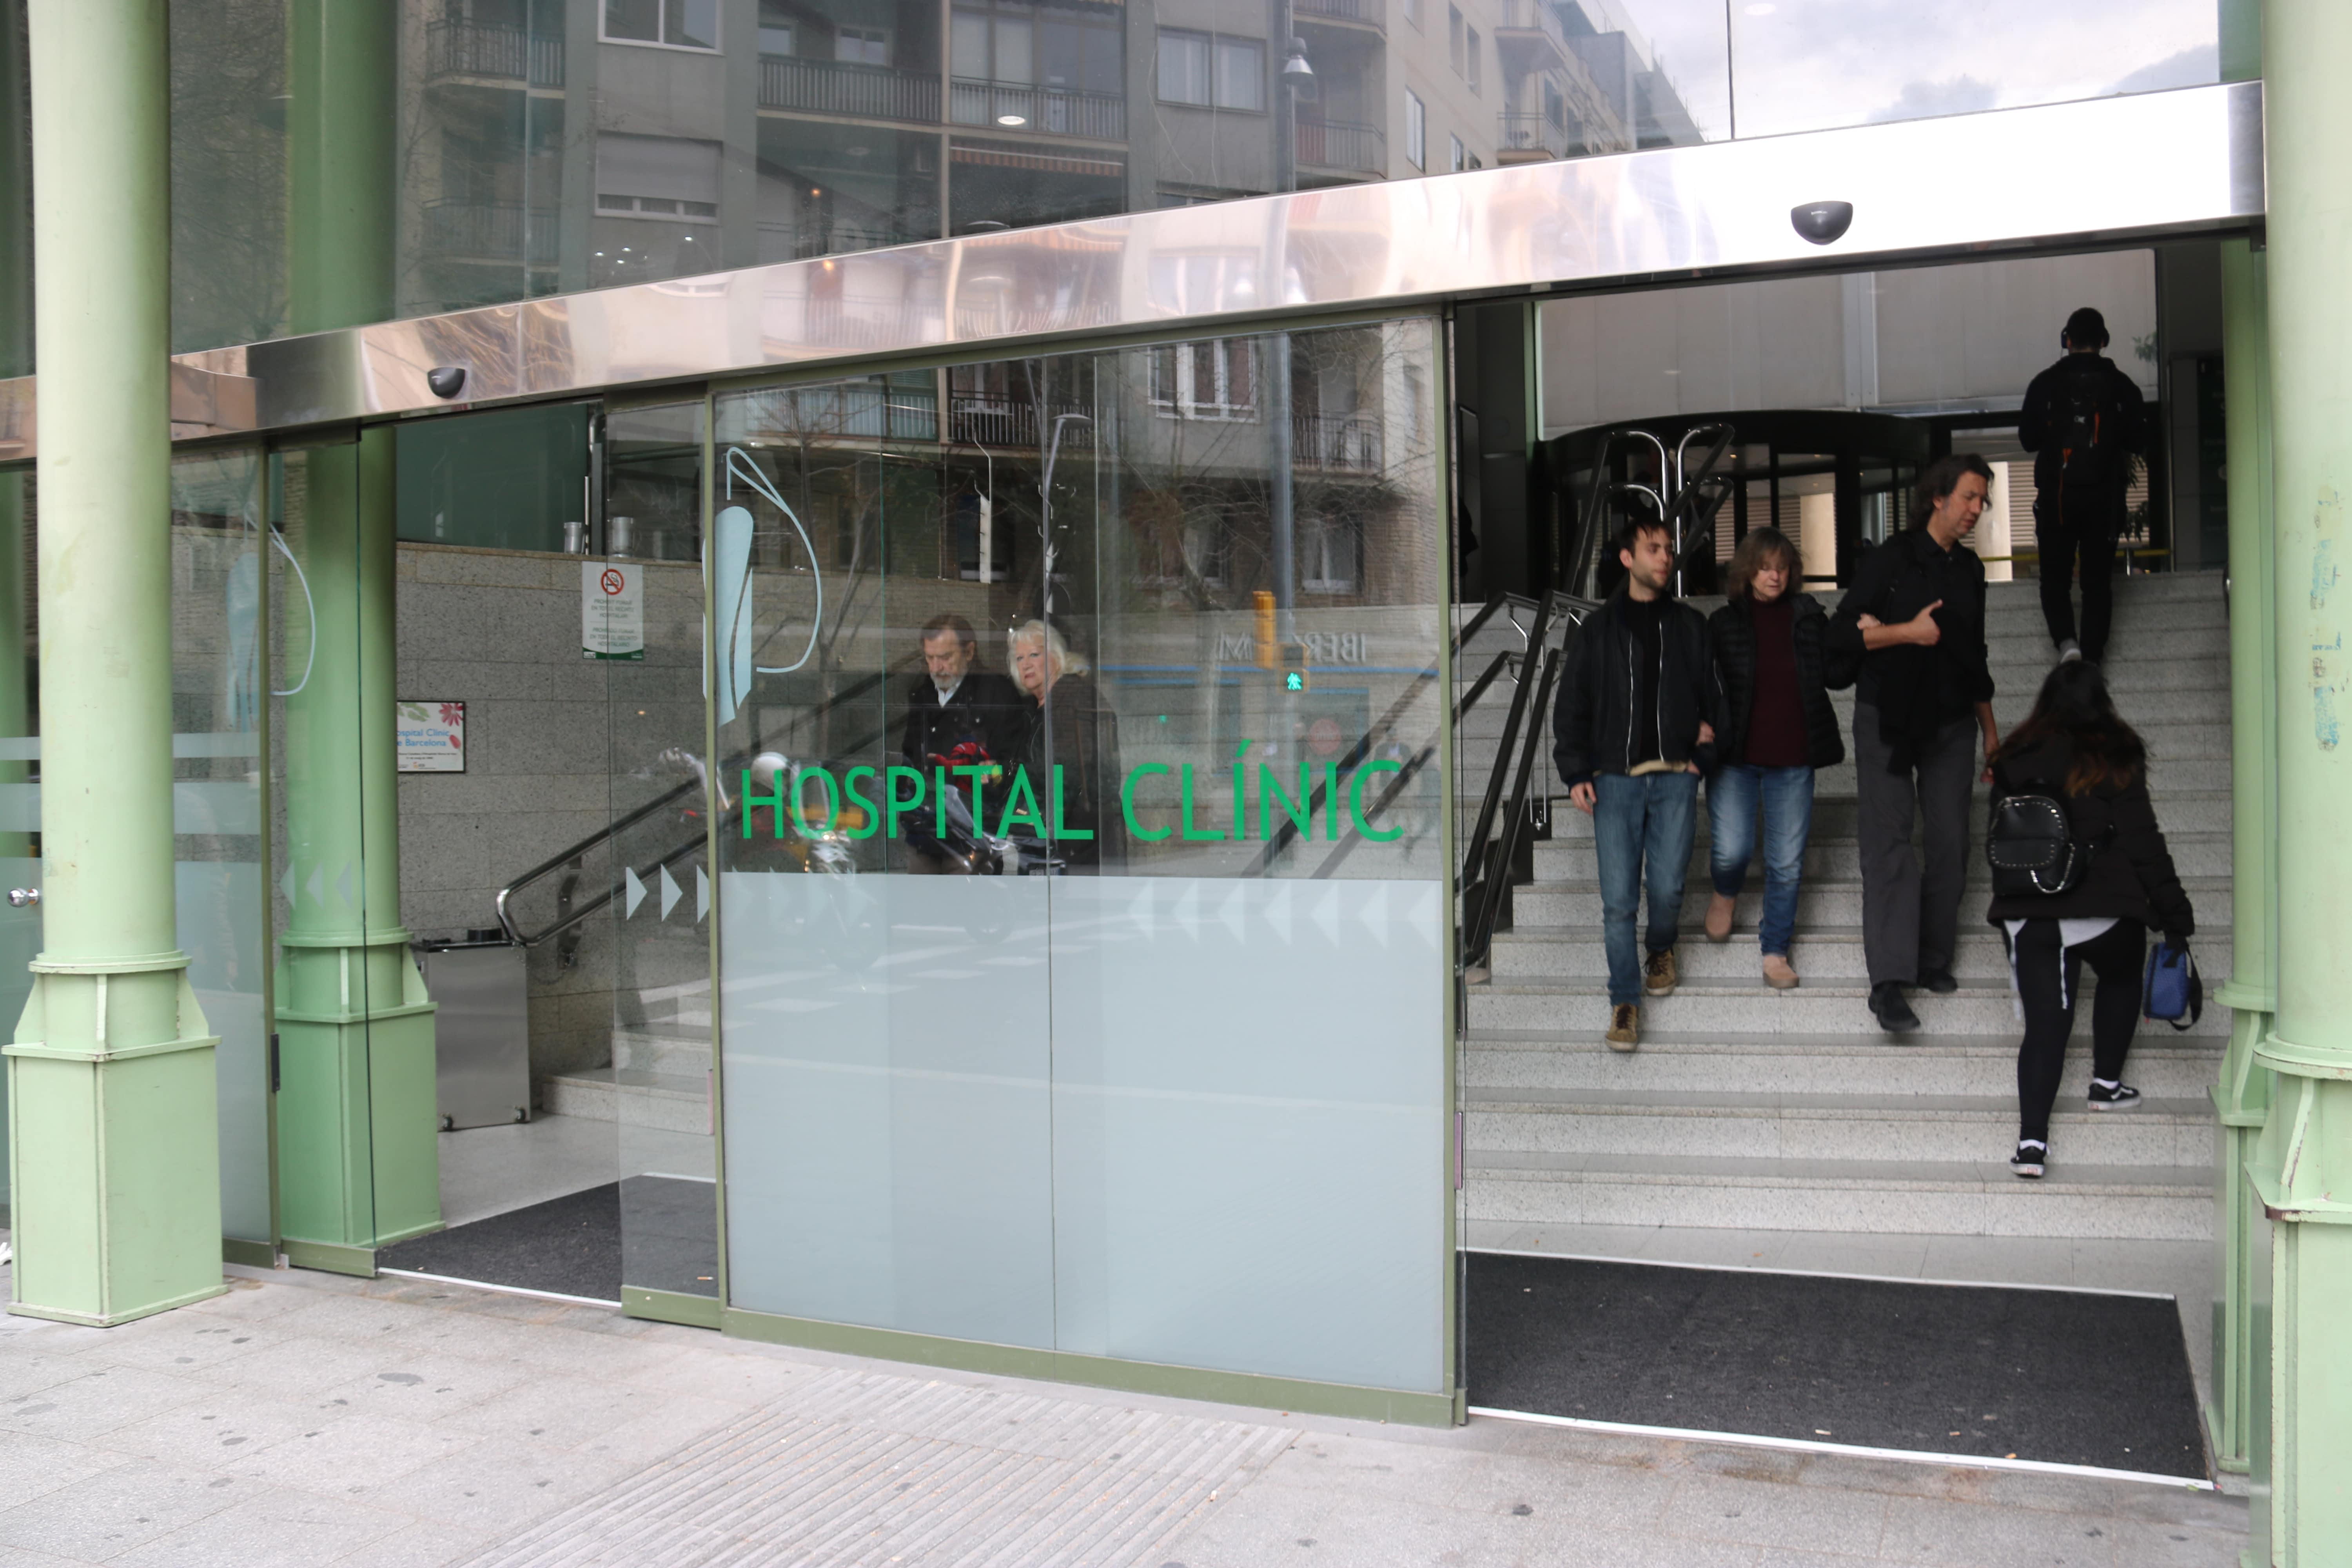 The front door to Barcelona's Hospital Clinic (by Lorcan Doherty)